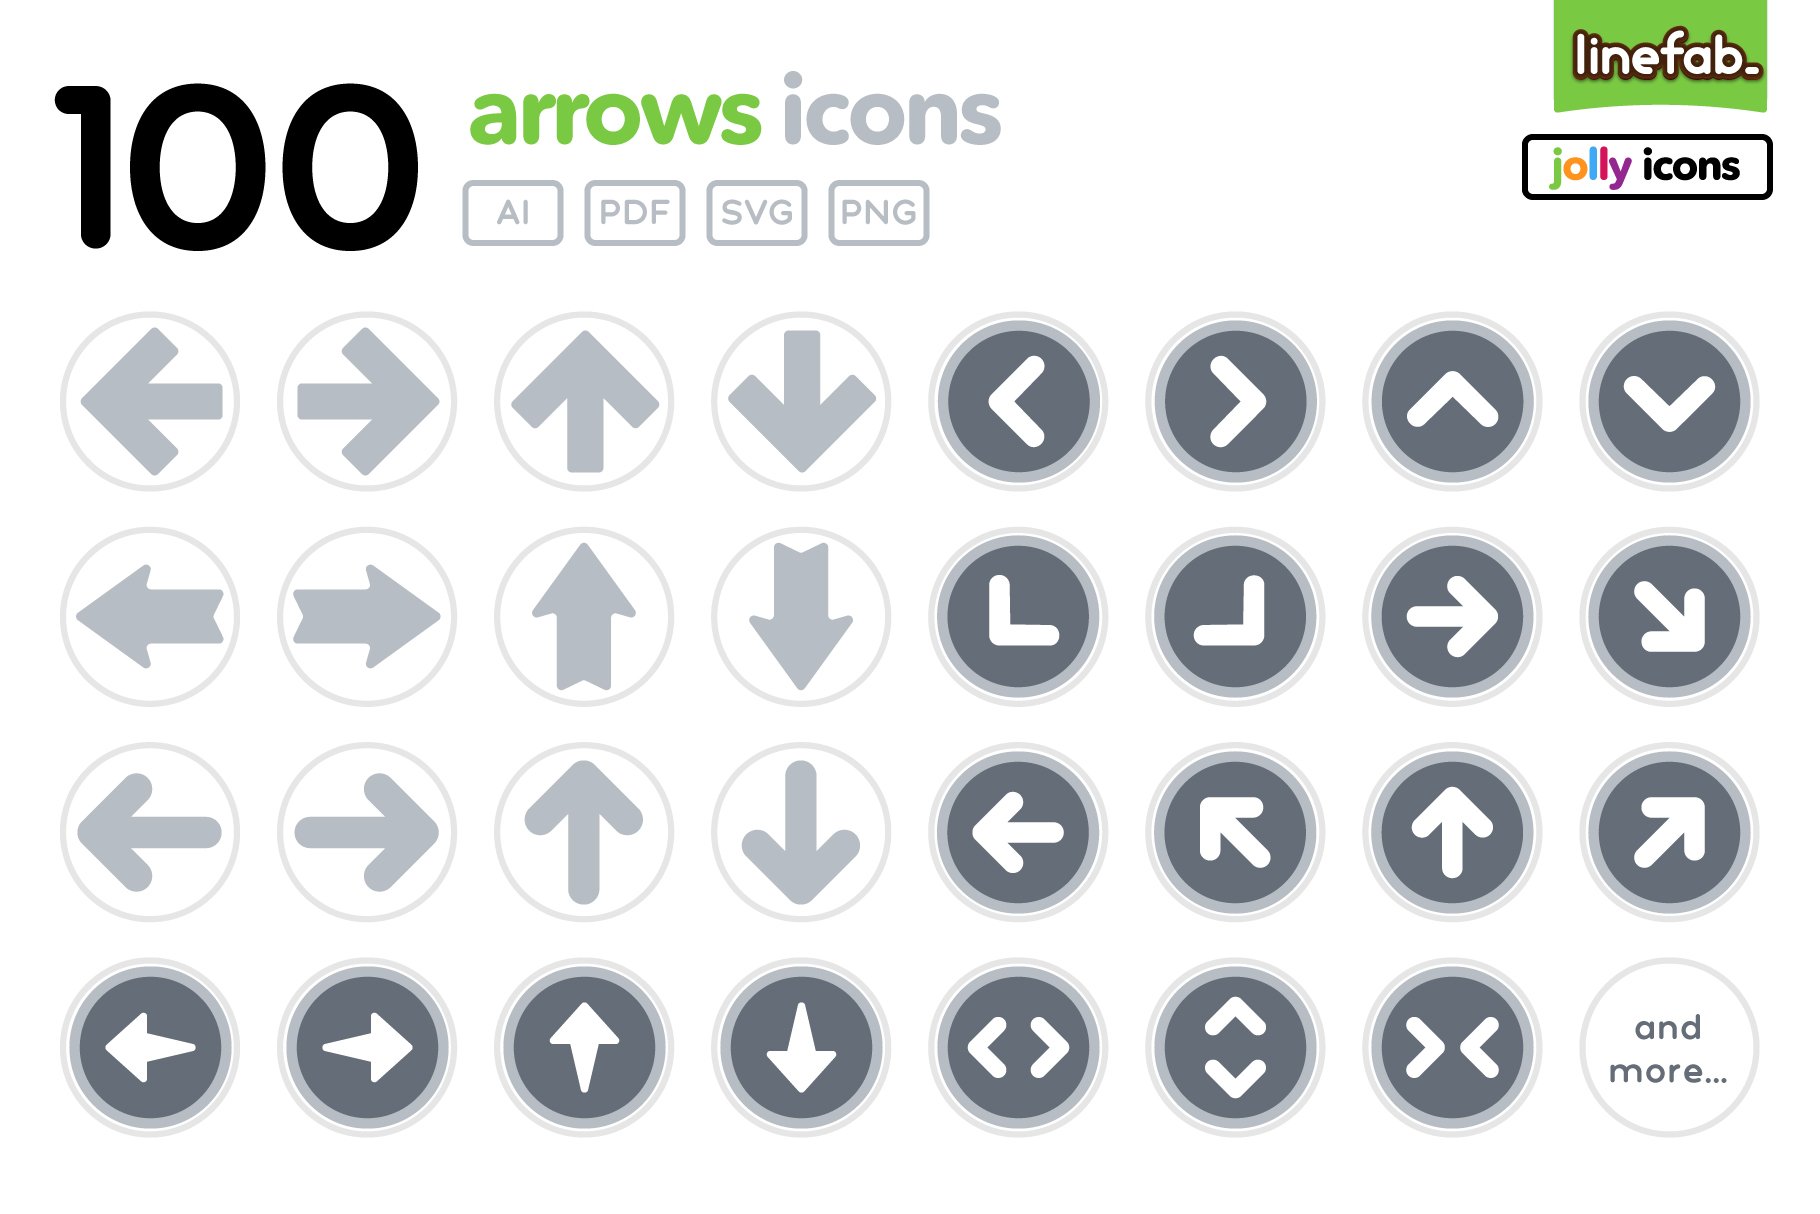 100 Arrows Icons - Jolly - Grey cover image.